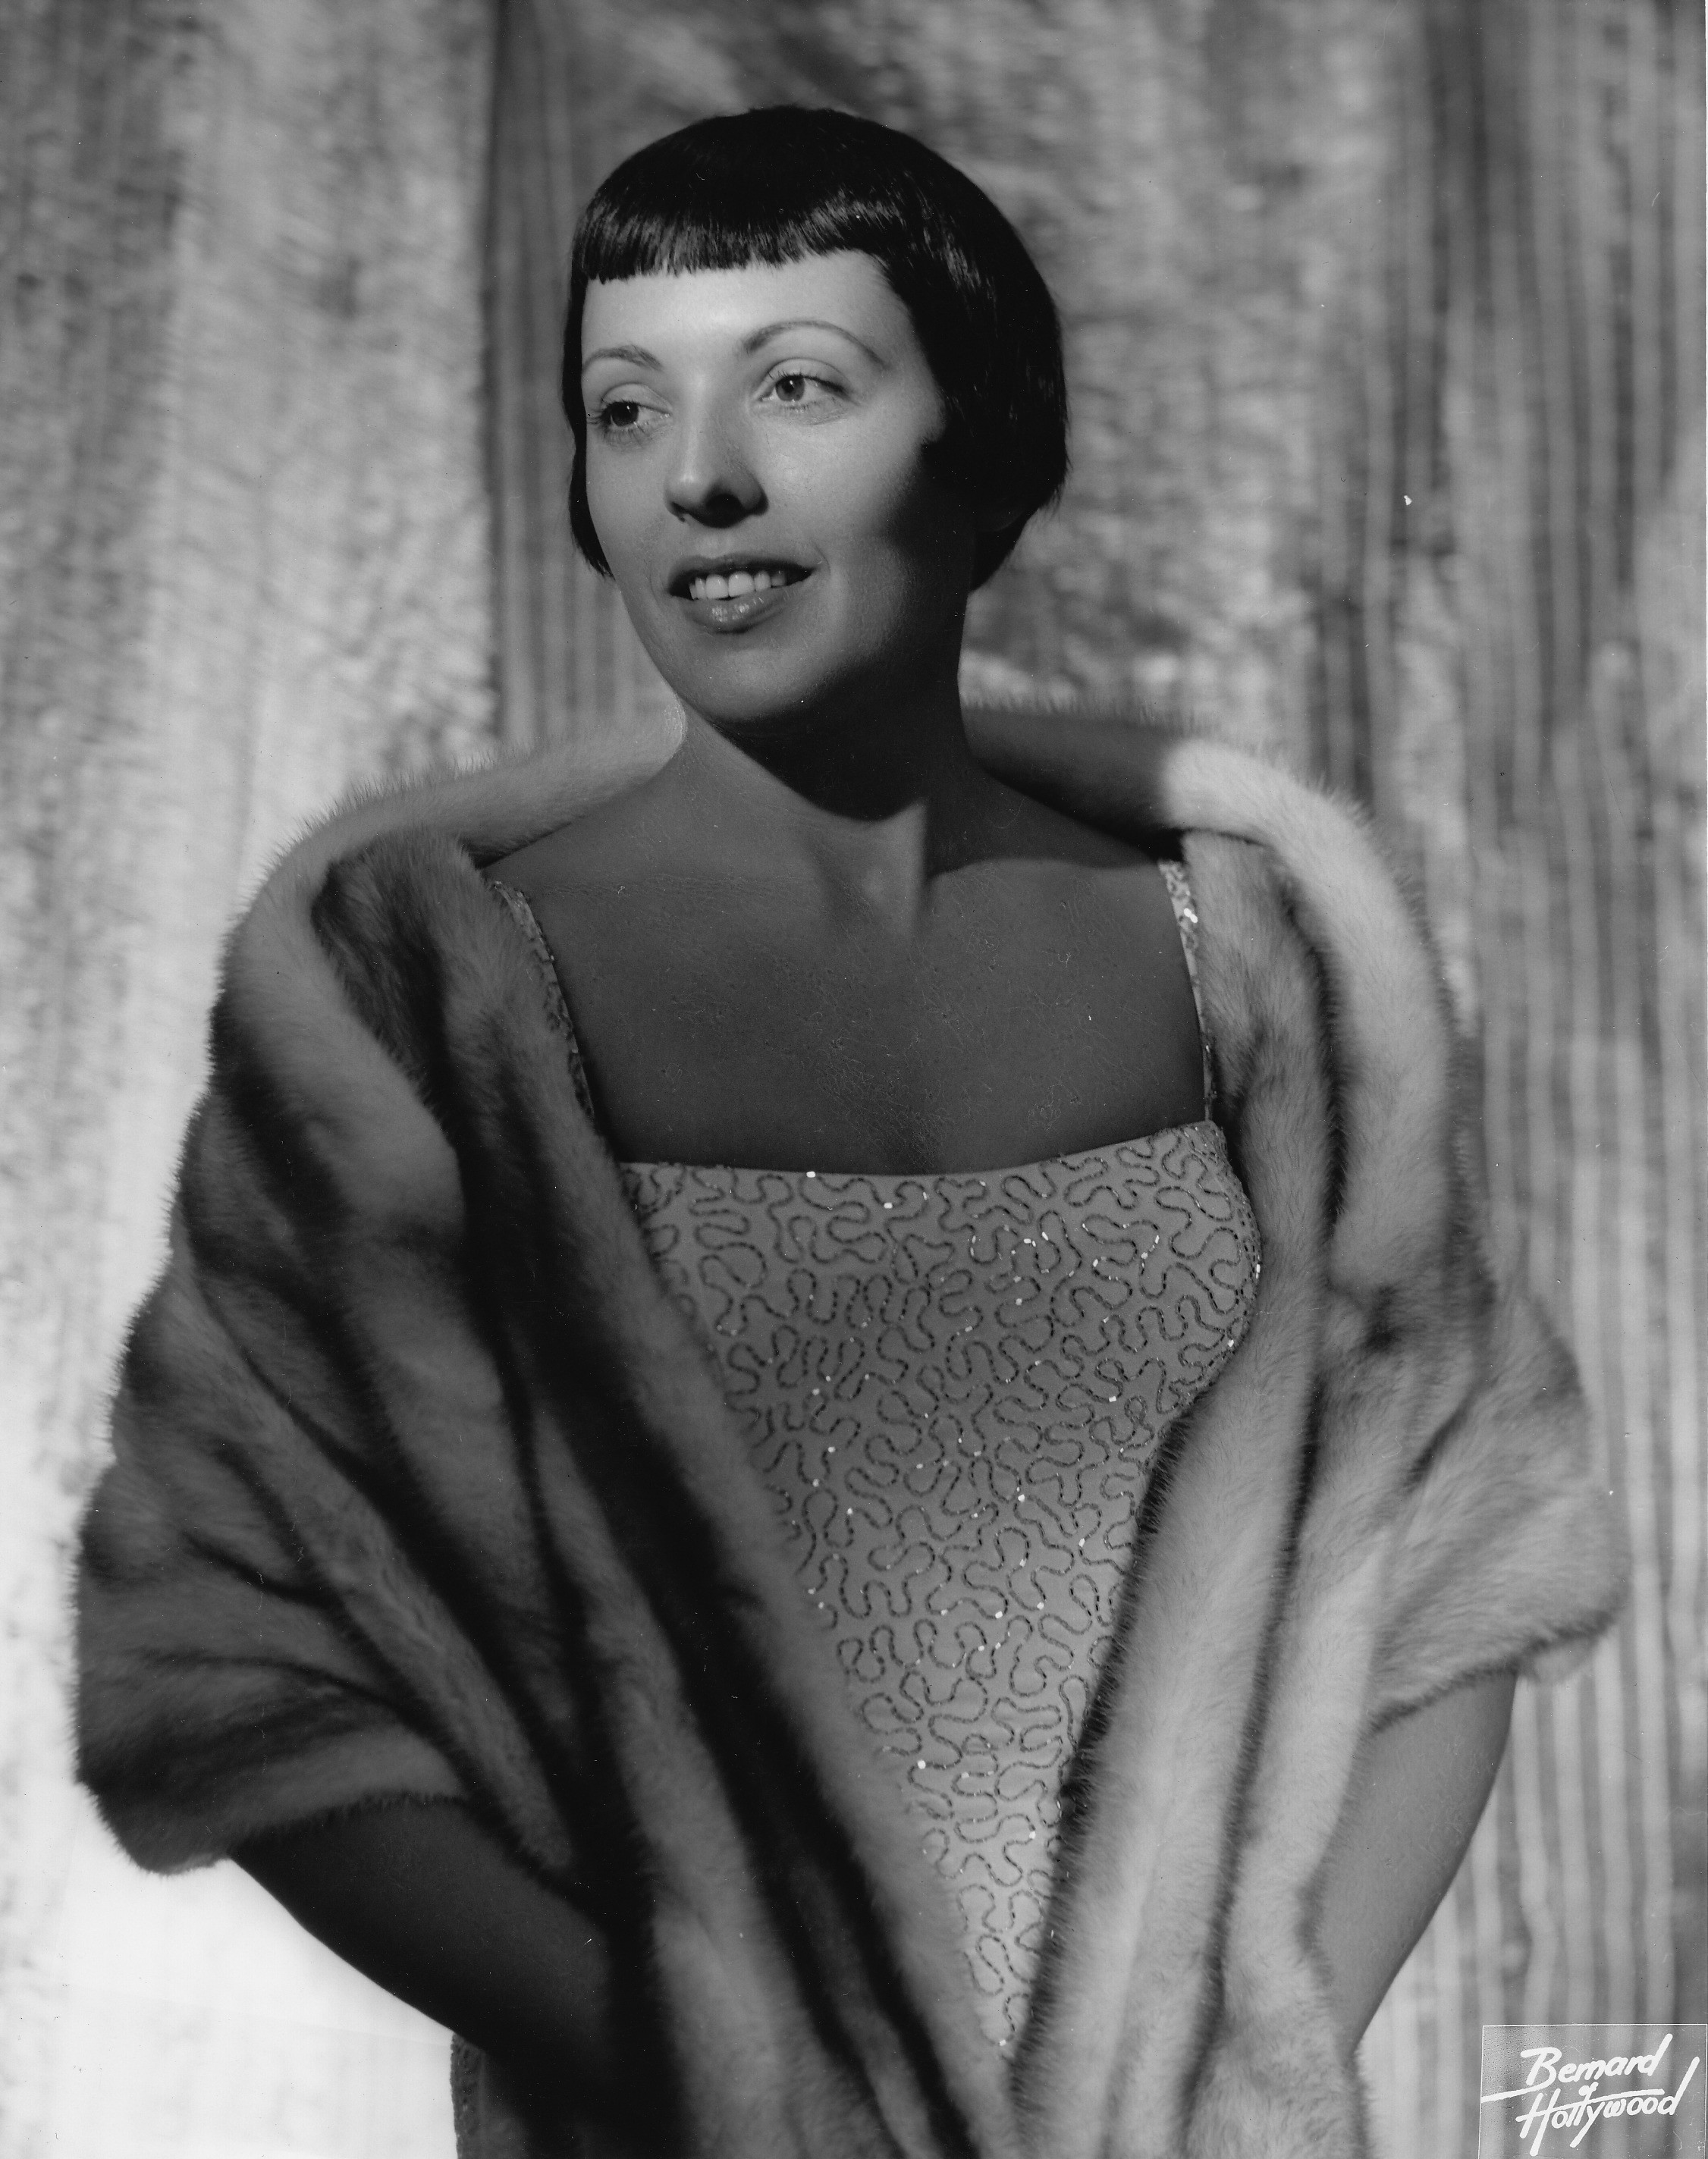 Louis Prima & Keely Smith - That Old Black Magic - The Very Best